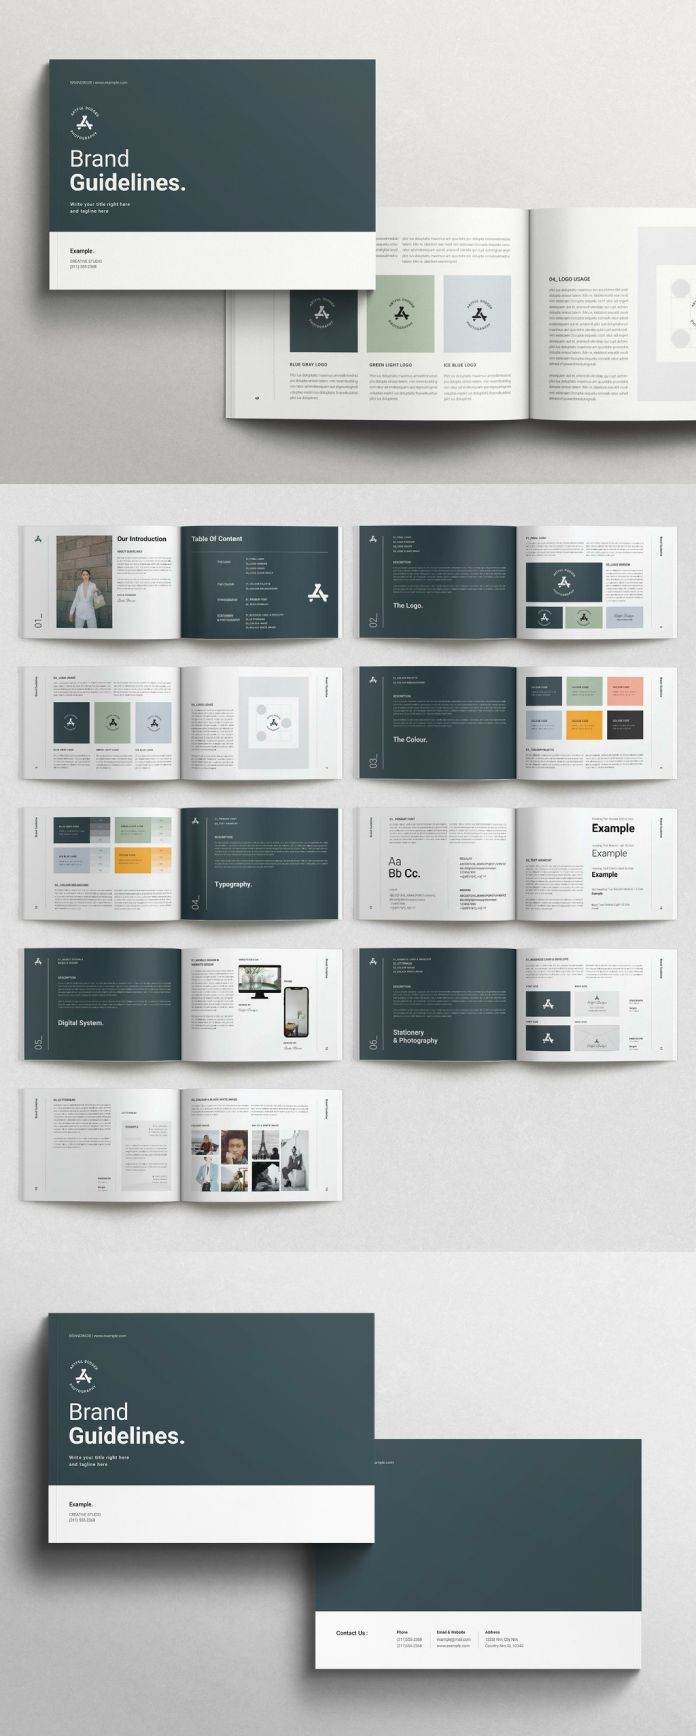 Landscape Format Brand Guidelines Template by TemplatesForest